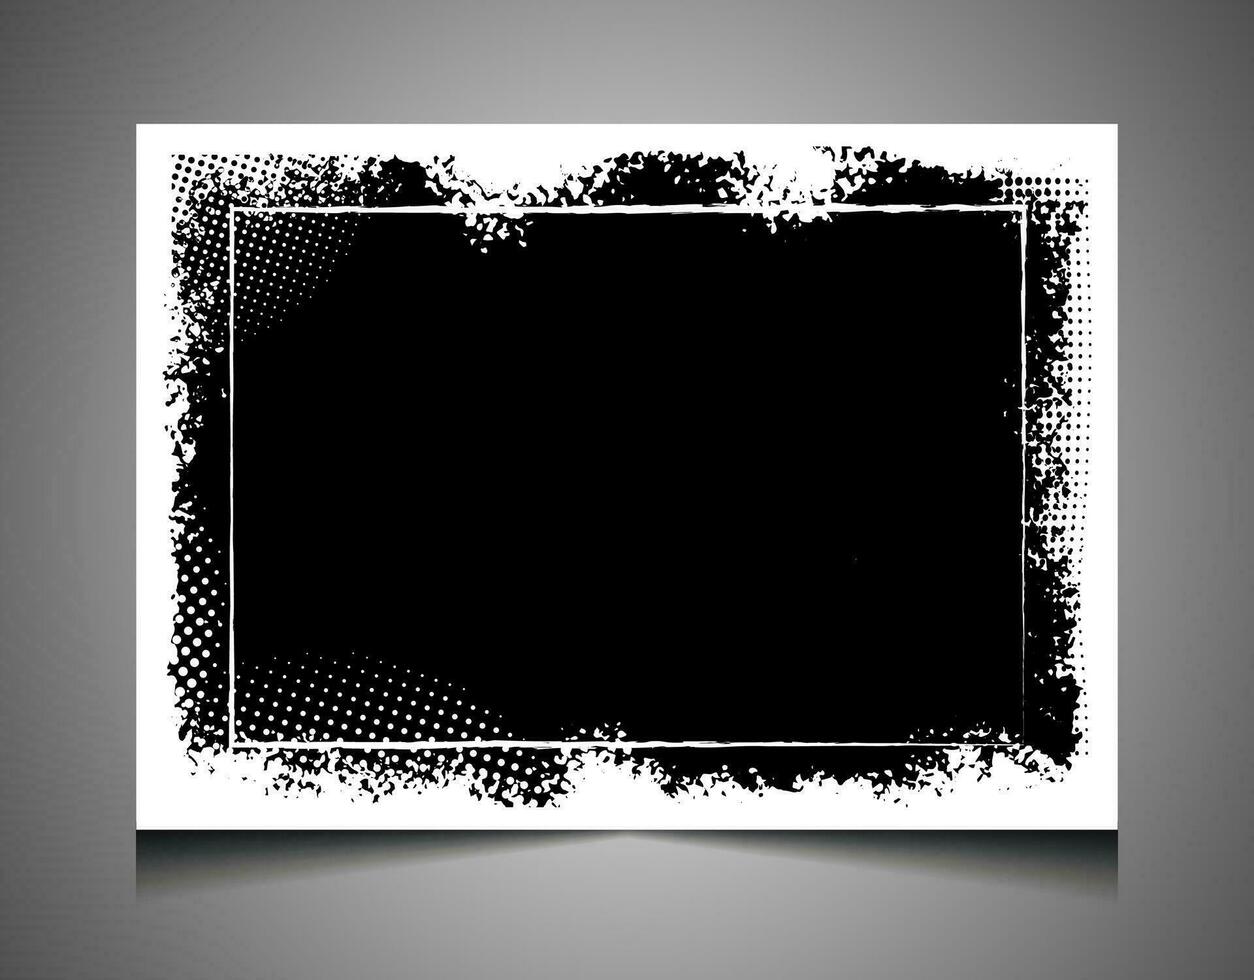 abstract vintage black and white photo frame with a grunge texture, background frame black frame vintage frame grunge picture frame vector frame